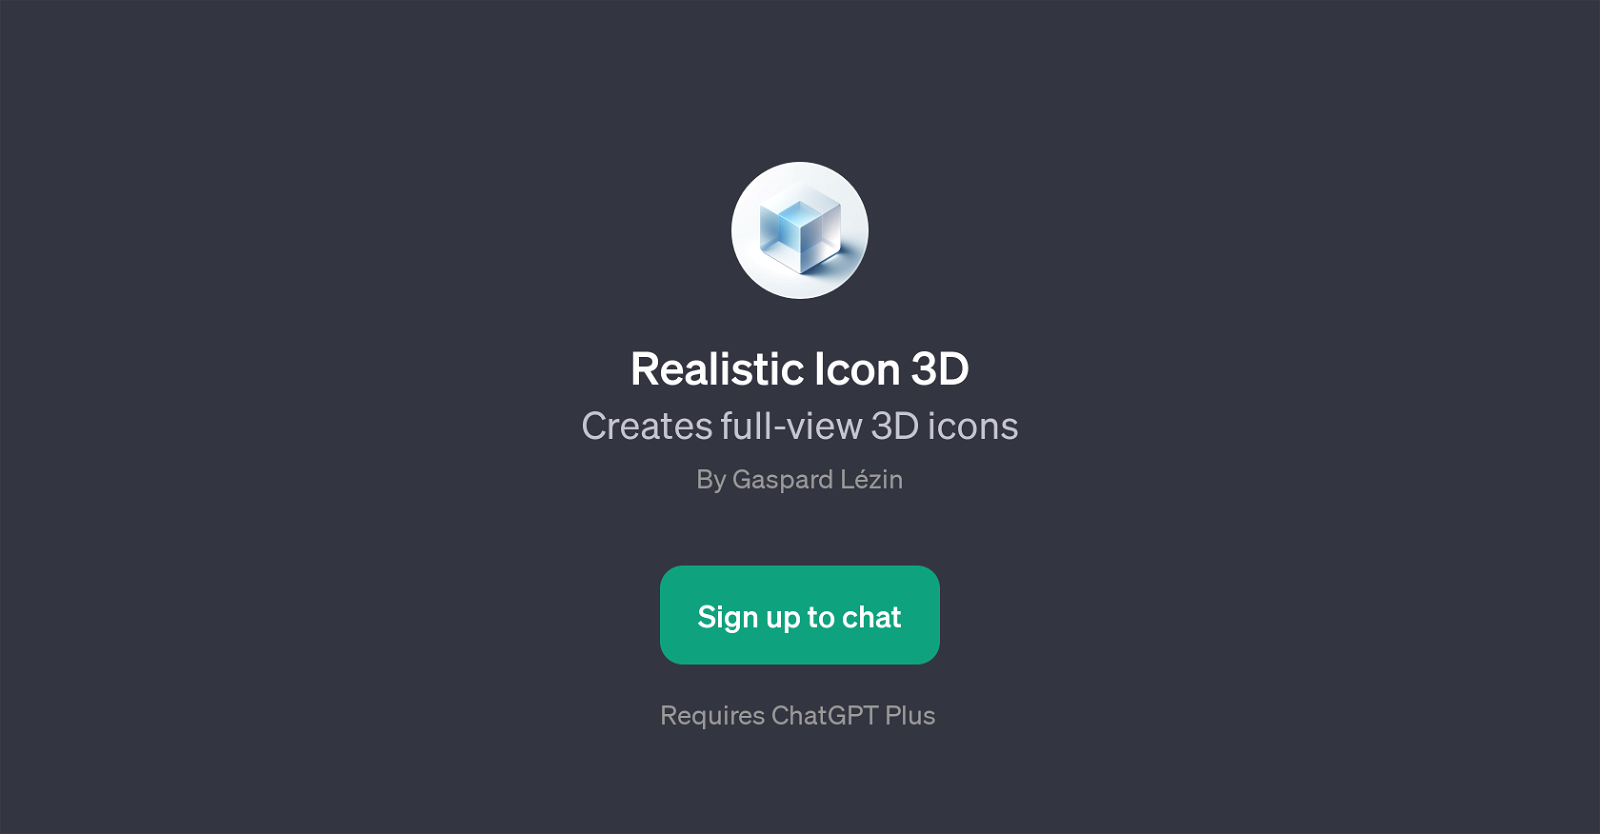 Realistic Icon 3D website